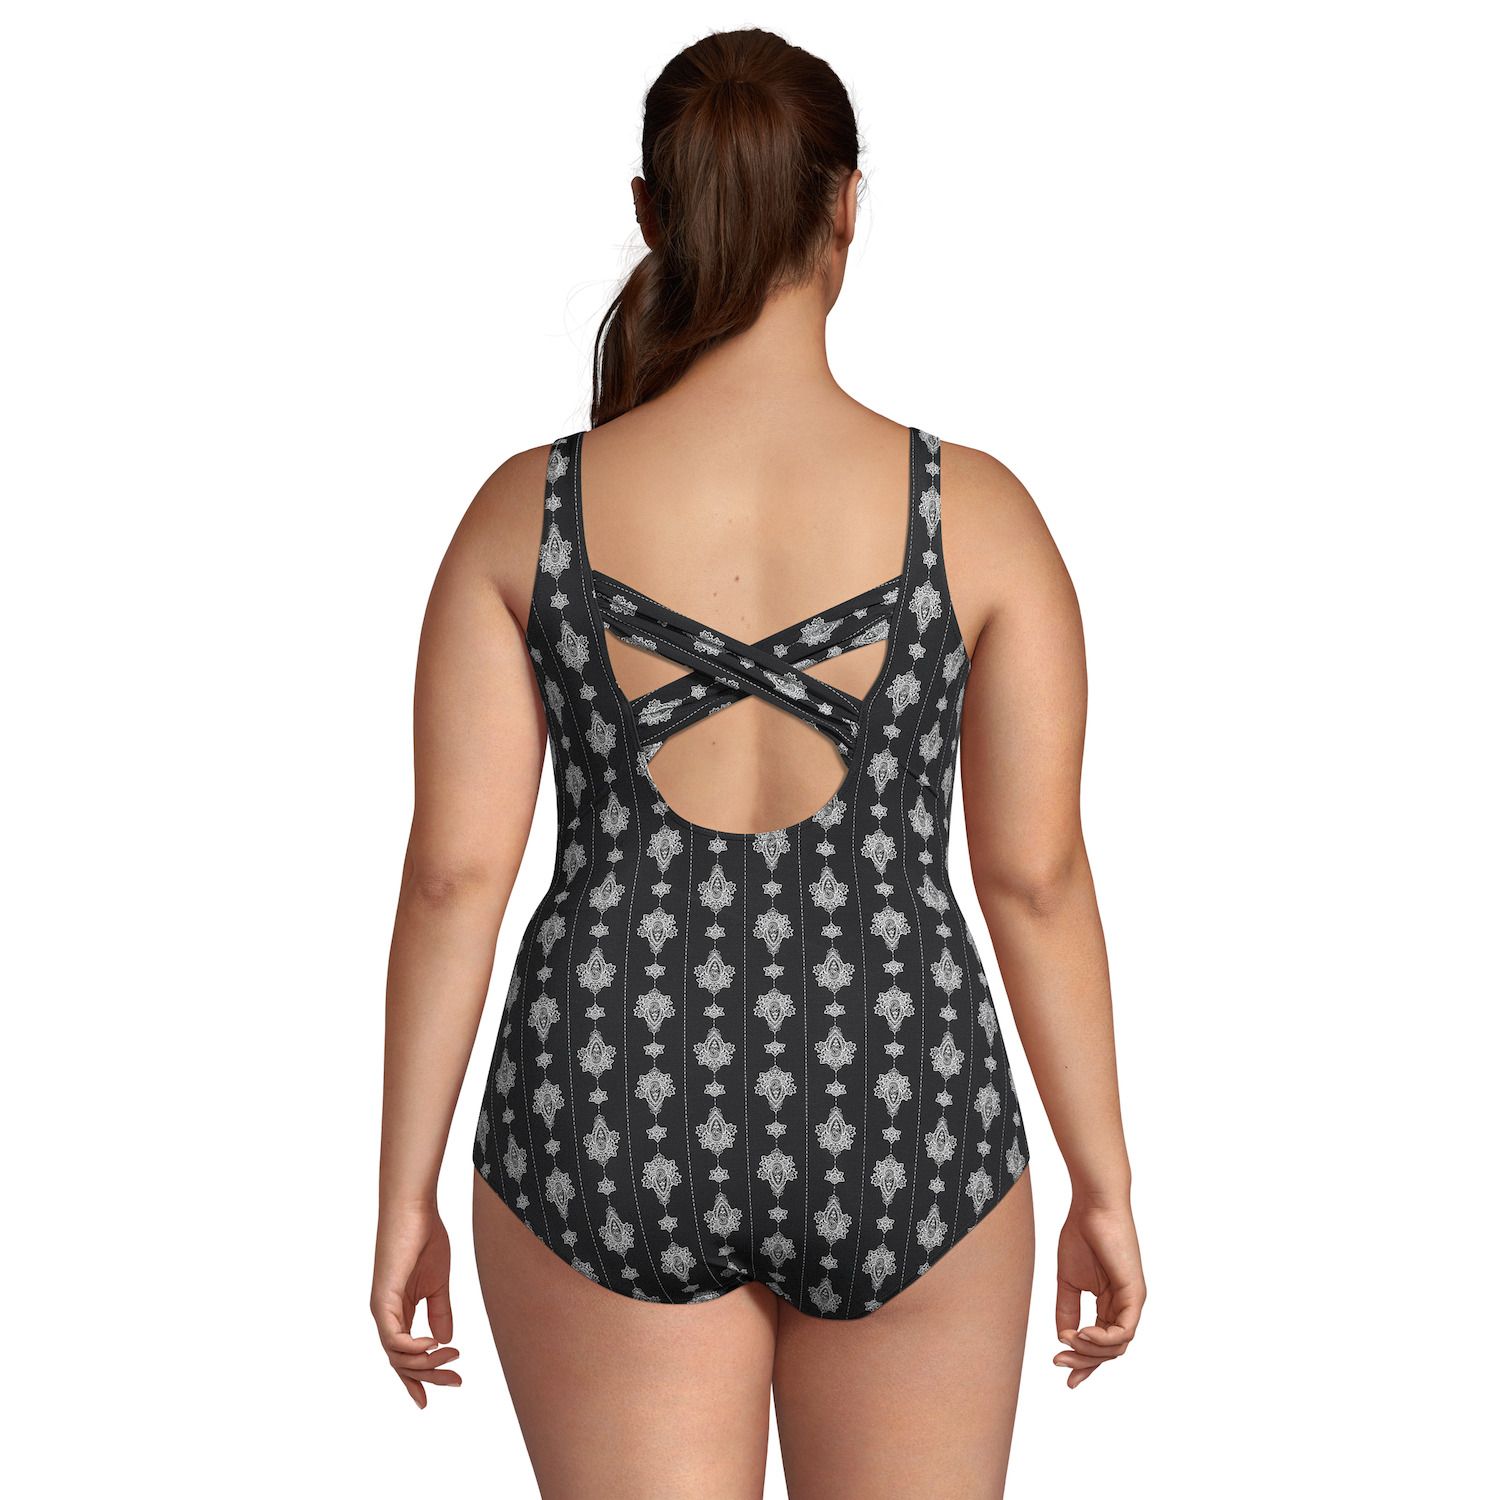 Plus Size Black Plussized Plus Size Underwire Swimsuits For Women Large  Bathing Suit For Beachwear And Swimming 210702 From Long005, $18.74